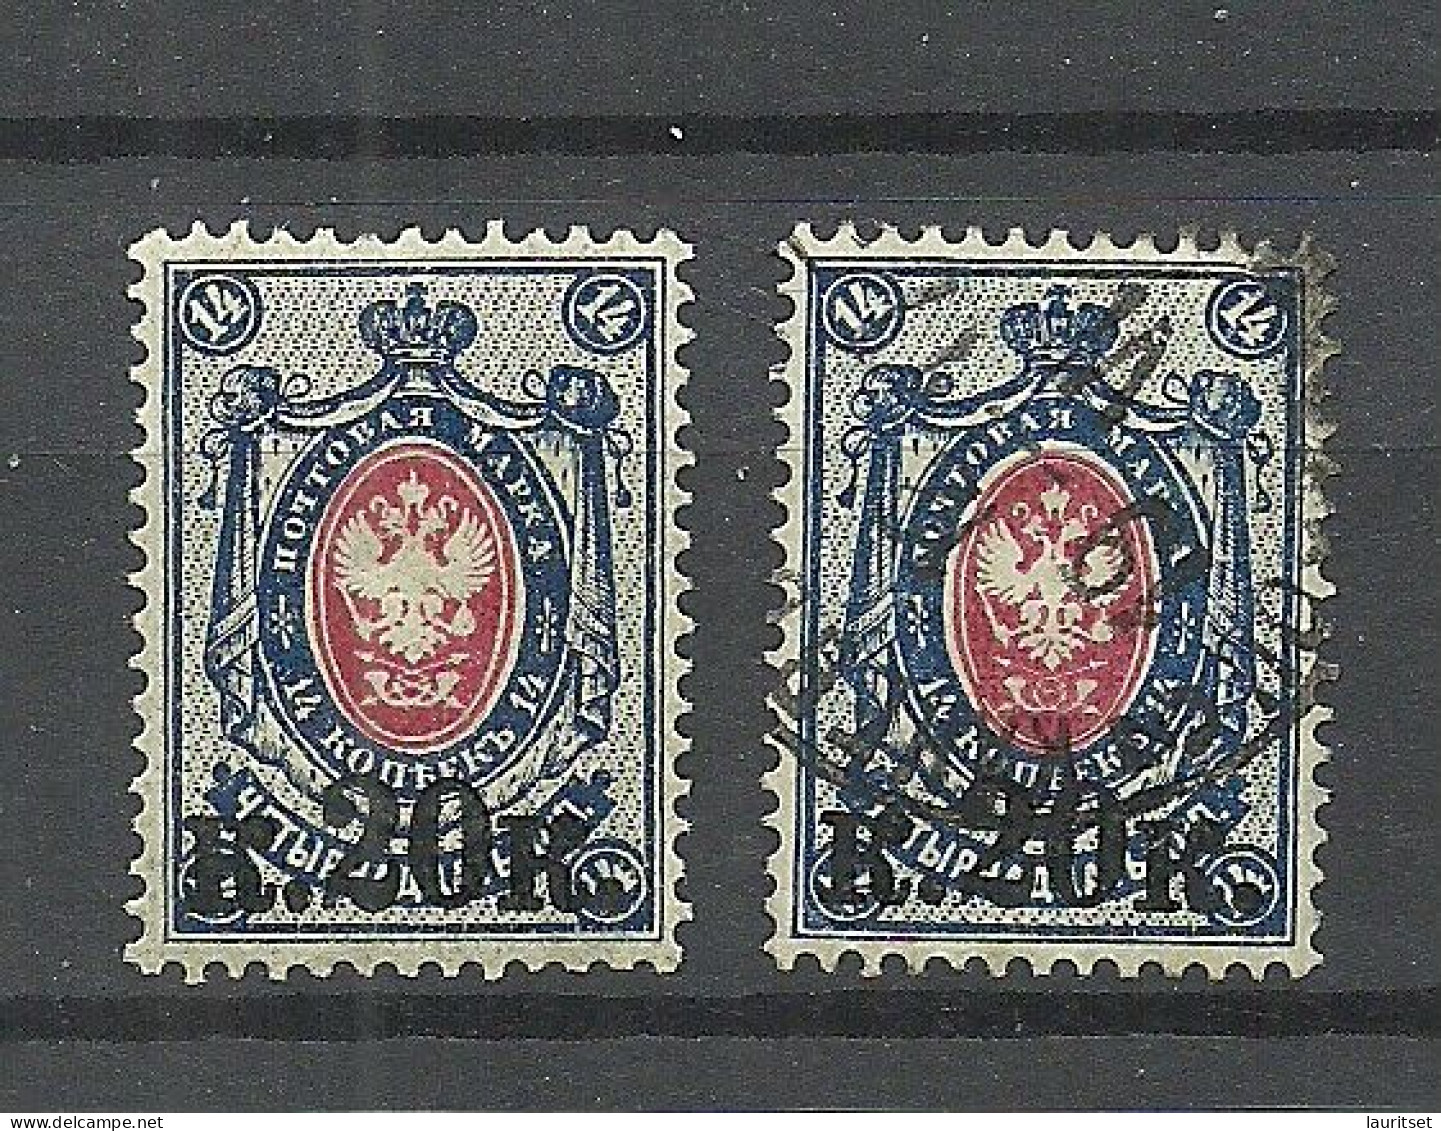 RUSSLAND RUSSIA 1917 Michel 116 MNH + O/used - Unused Stamps